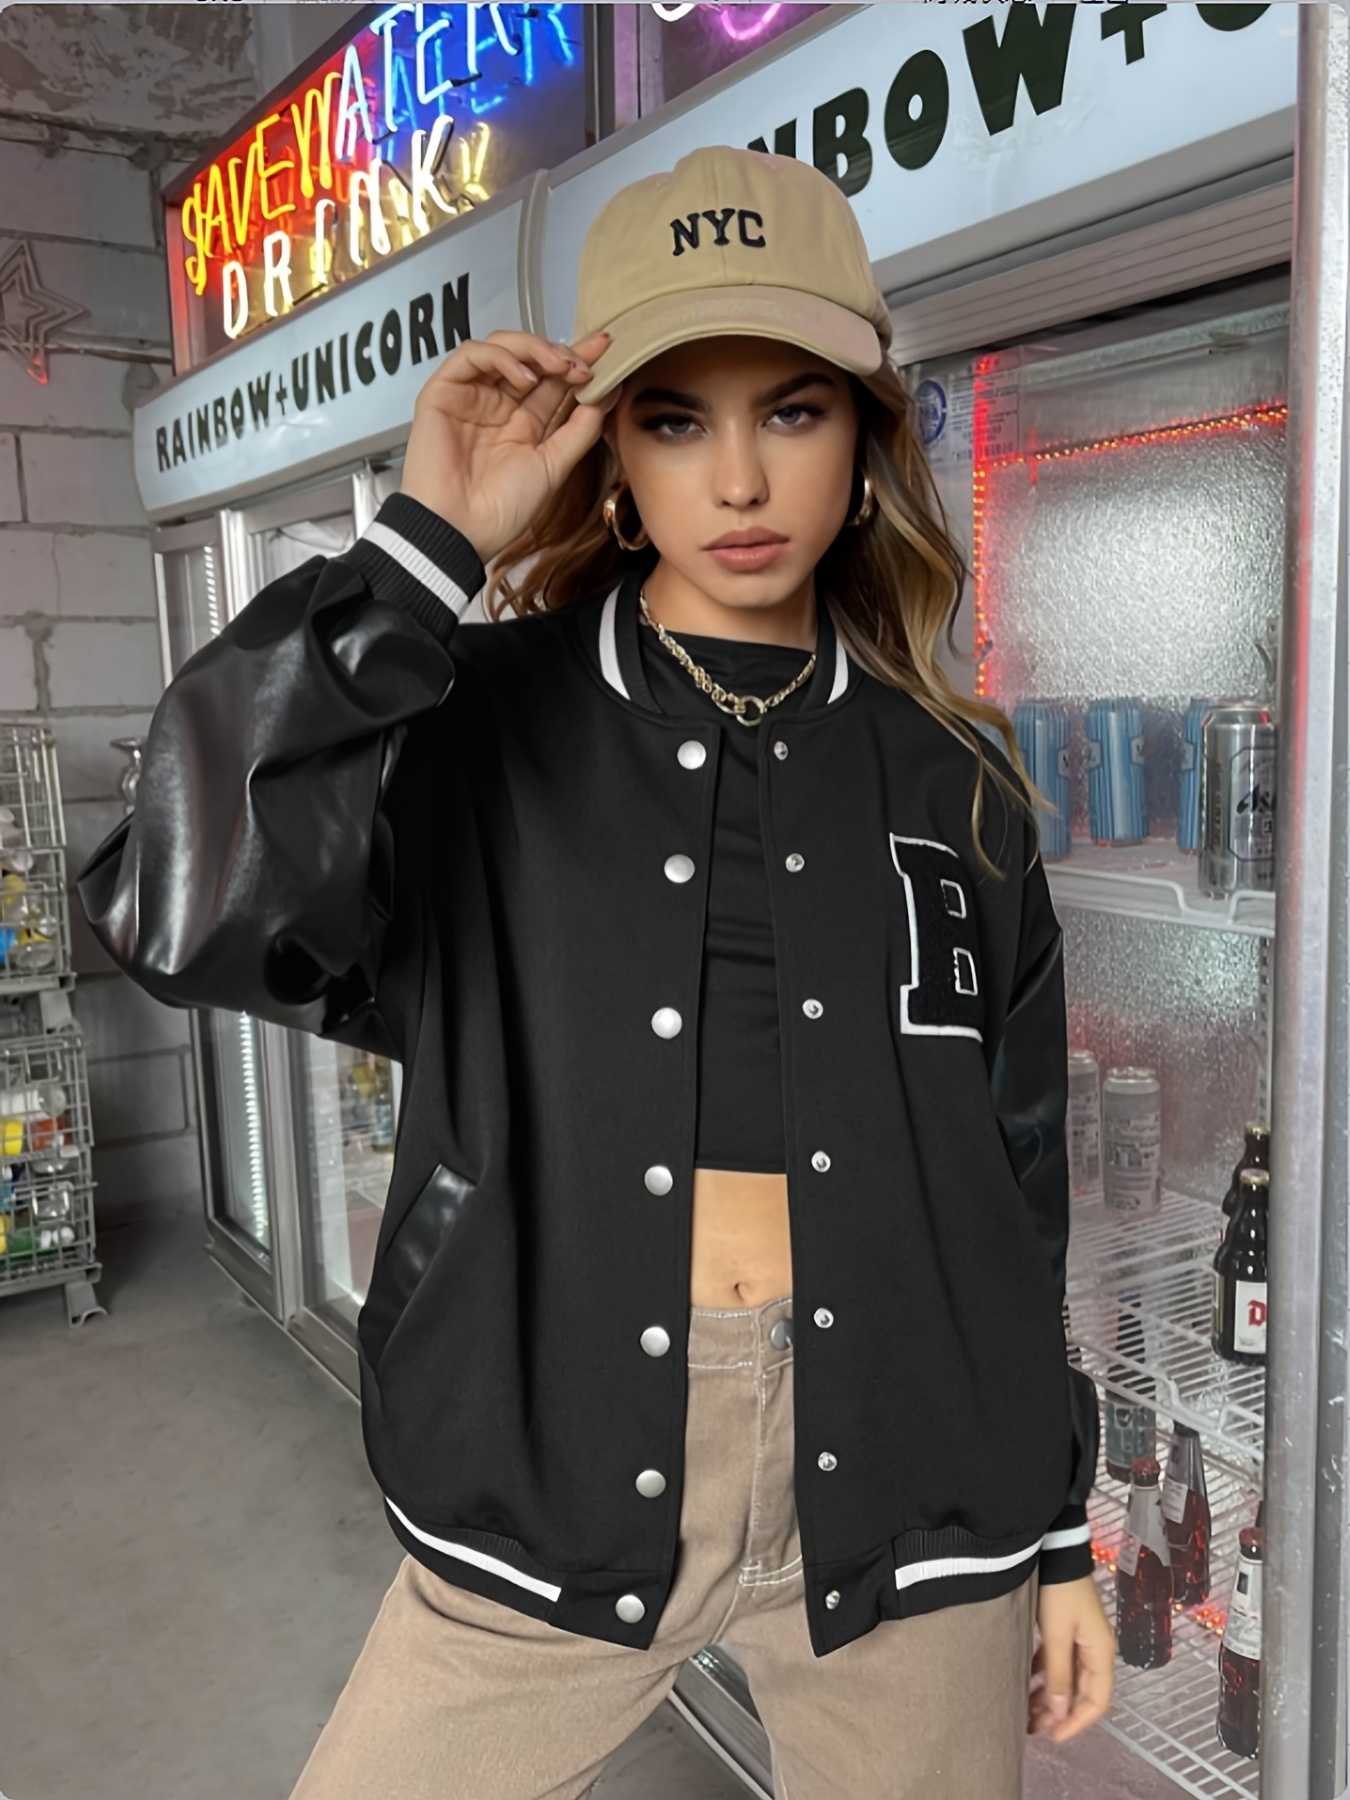 Streetwear Clothes, Hats, Shirts, Shoes